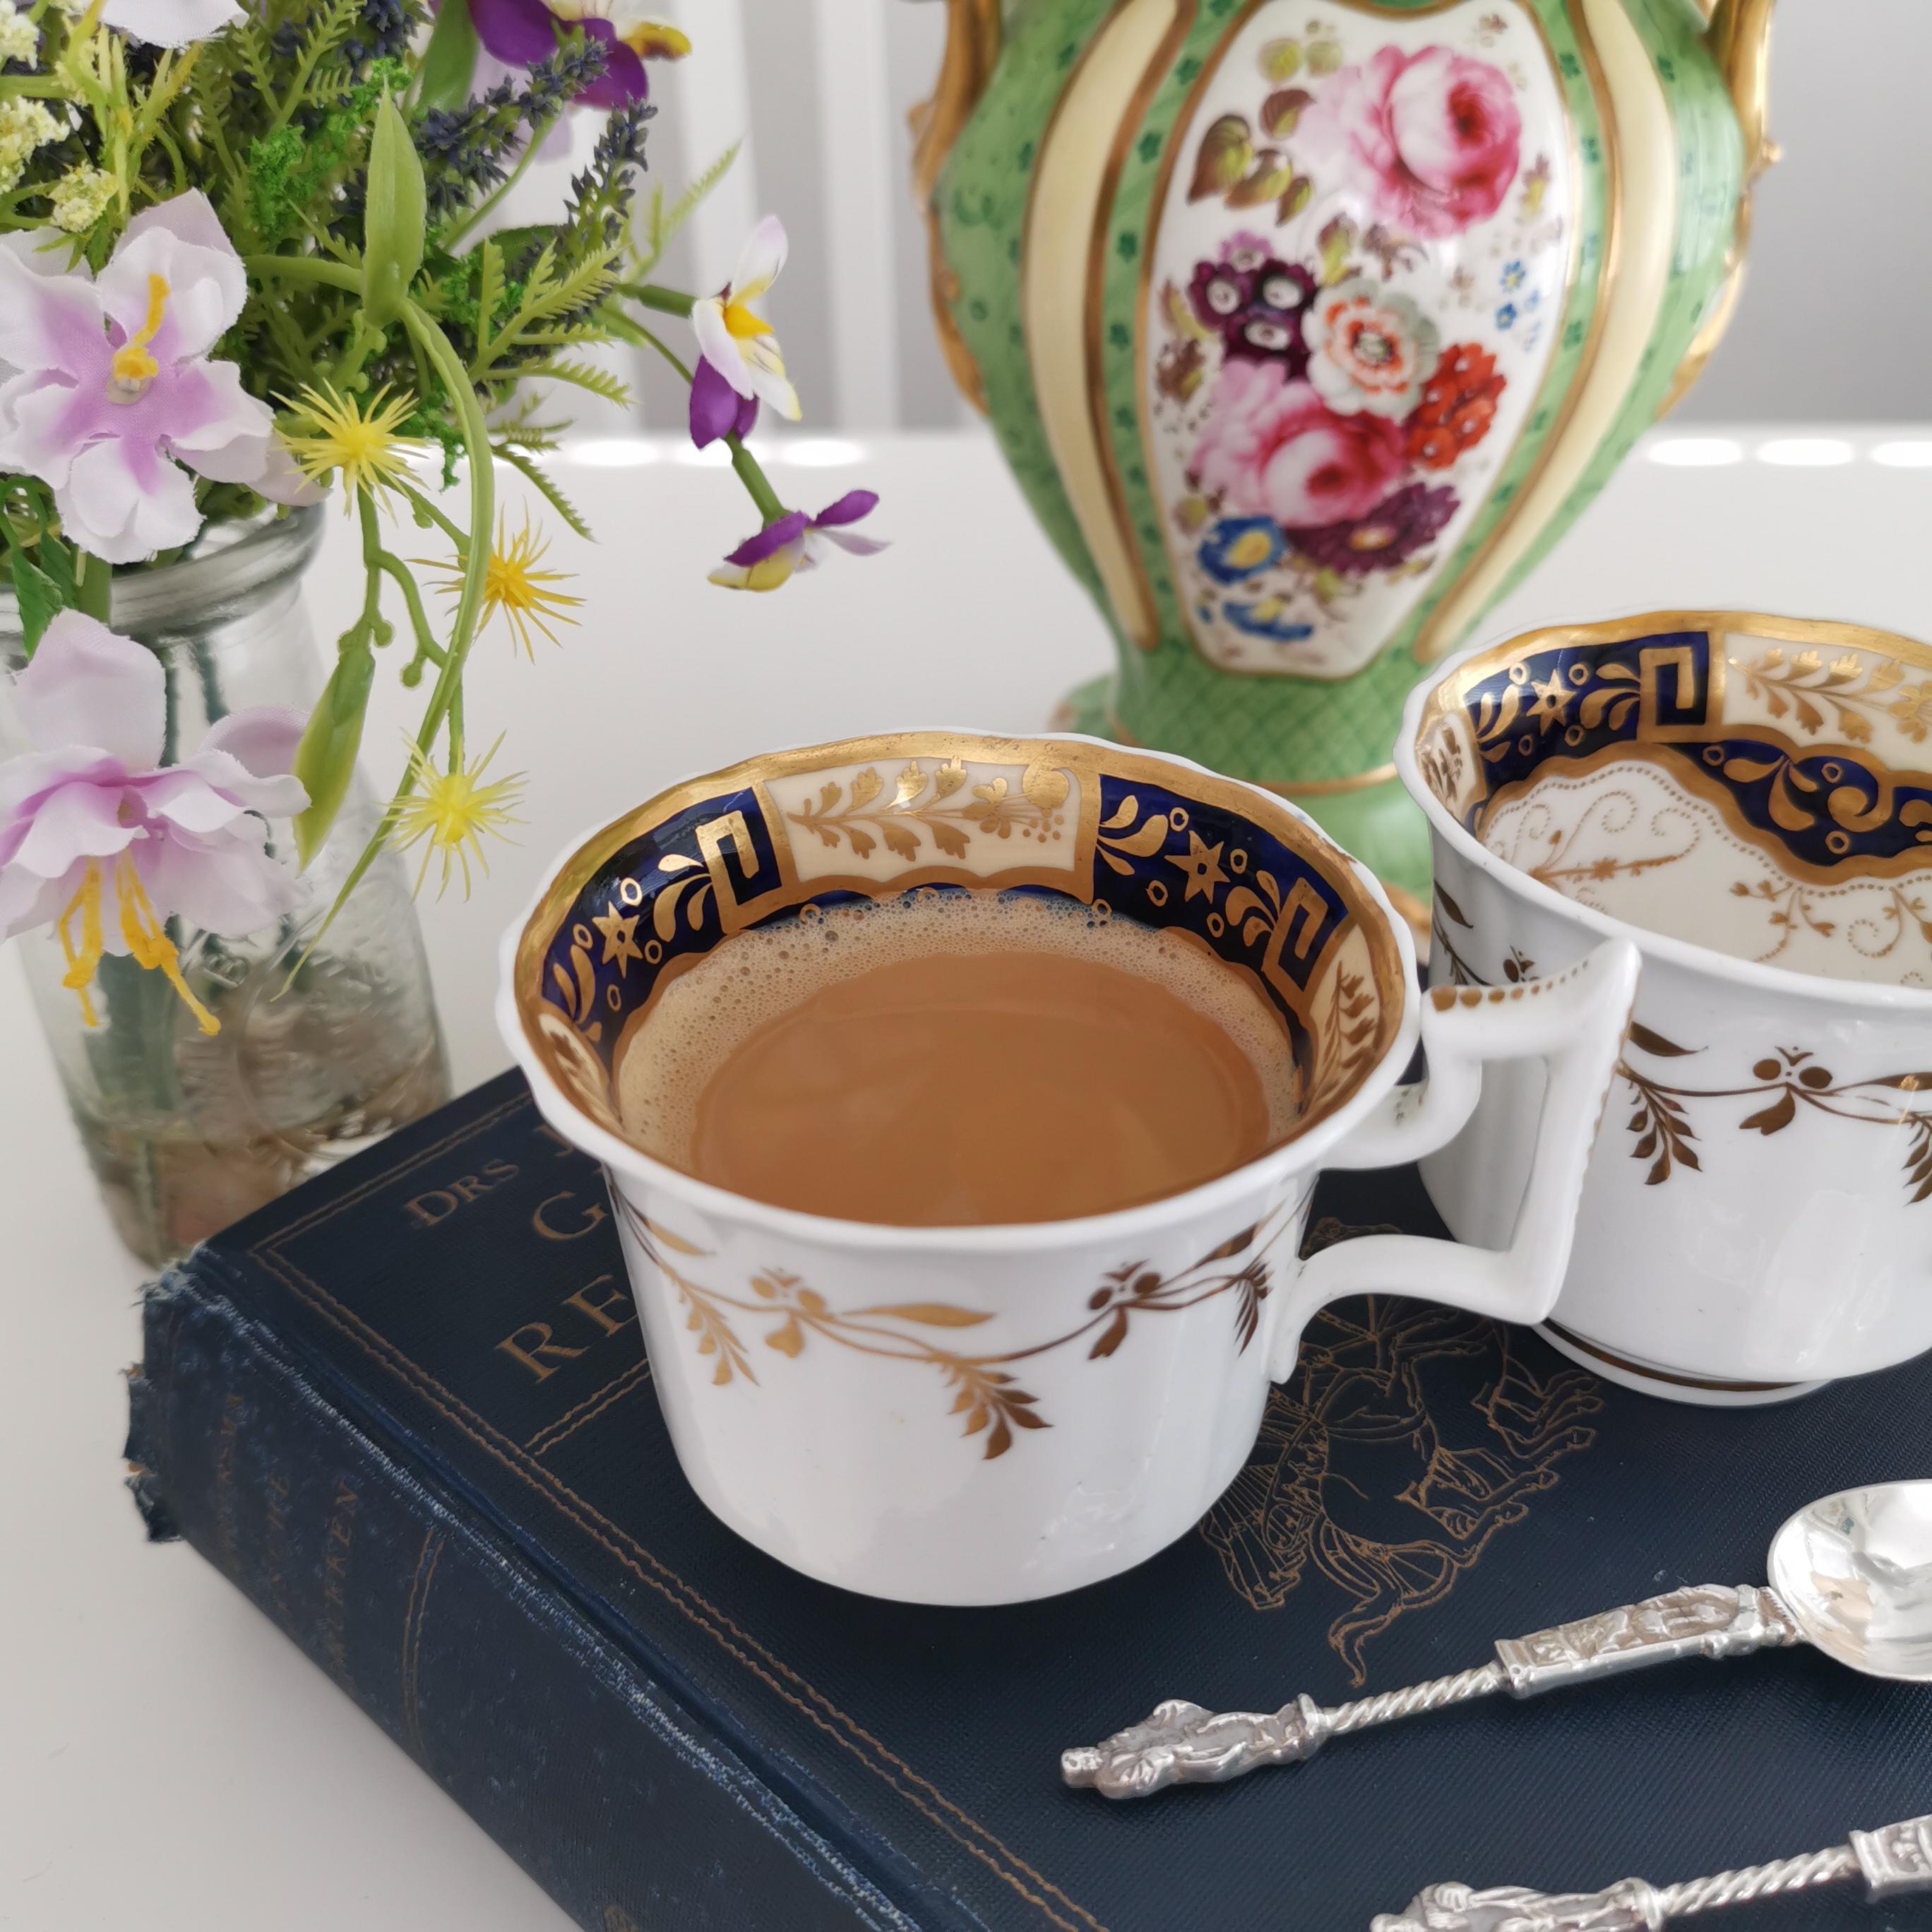 This is beautiful orphaned coffee cup made by Yates in about 1825, which is known as the Regency period. The cup was decorated with the famous pattern 812, which was a pattern done by a factory often called the 